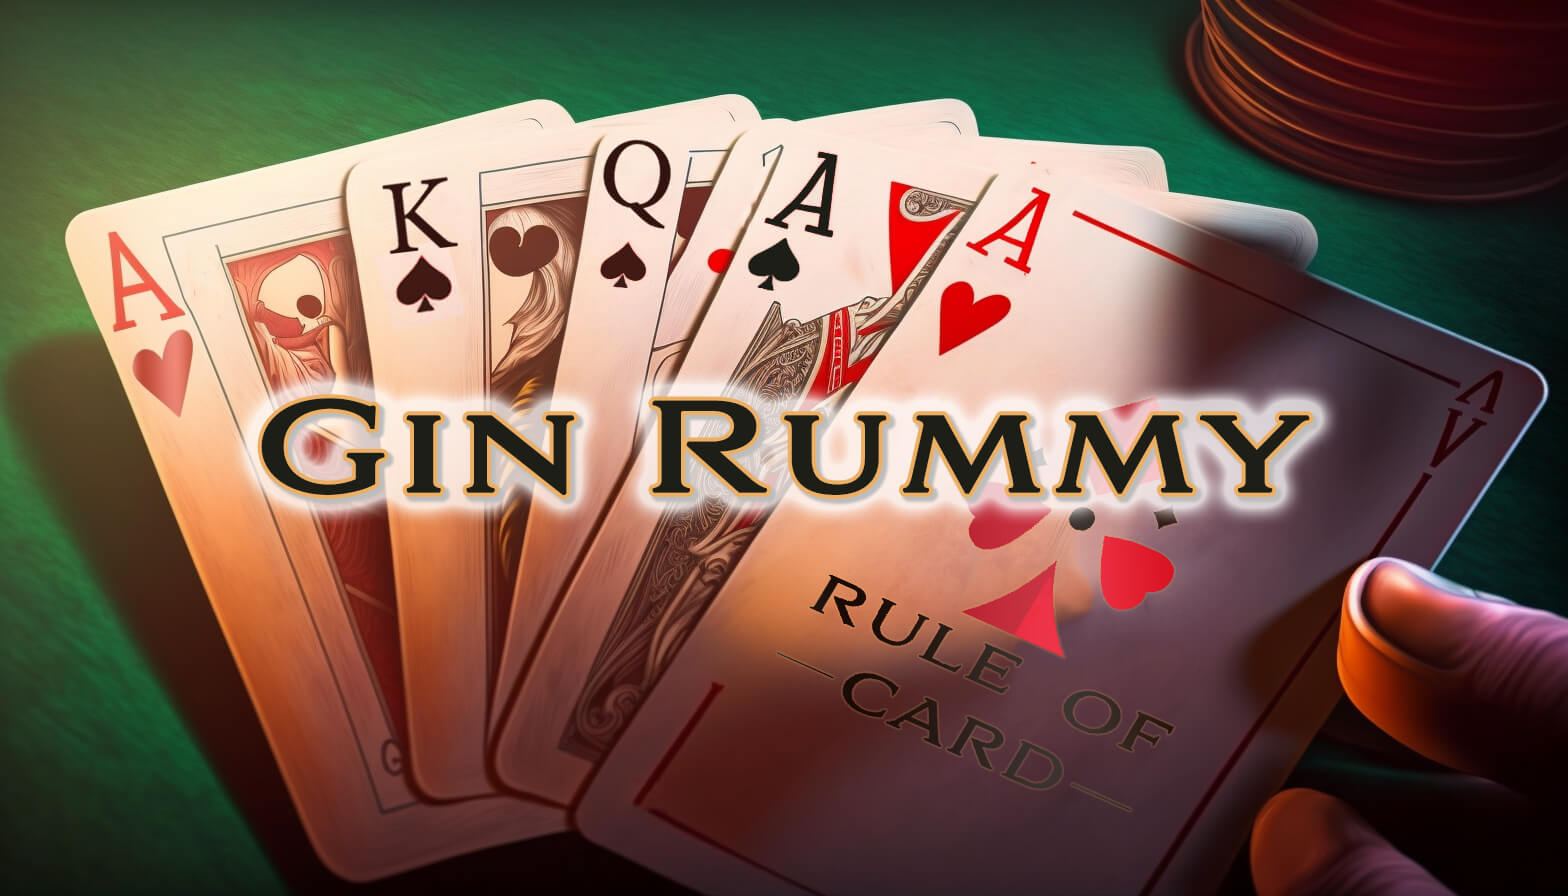 Playing the card game Gin Rummy